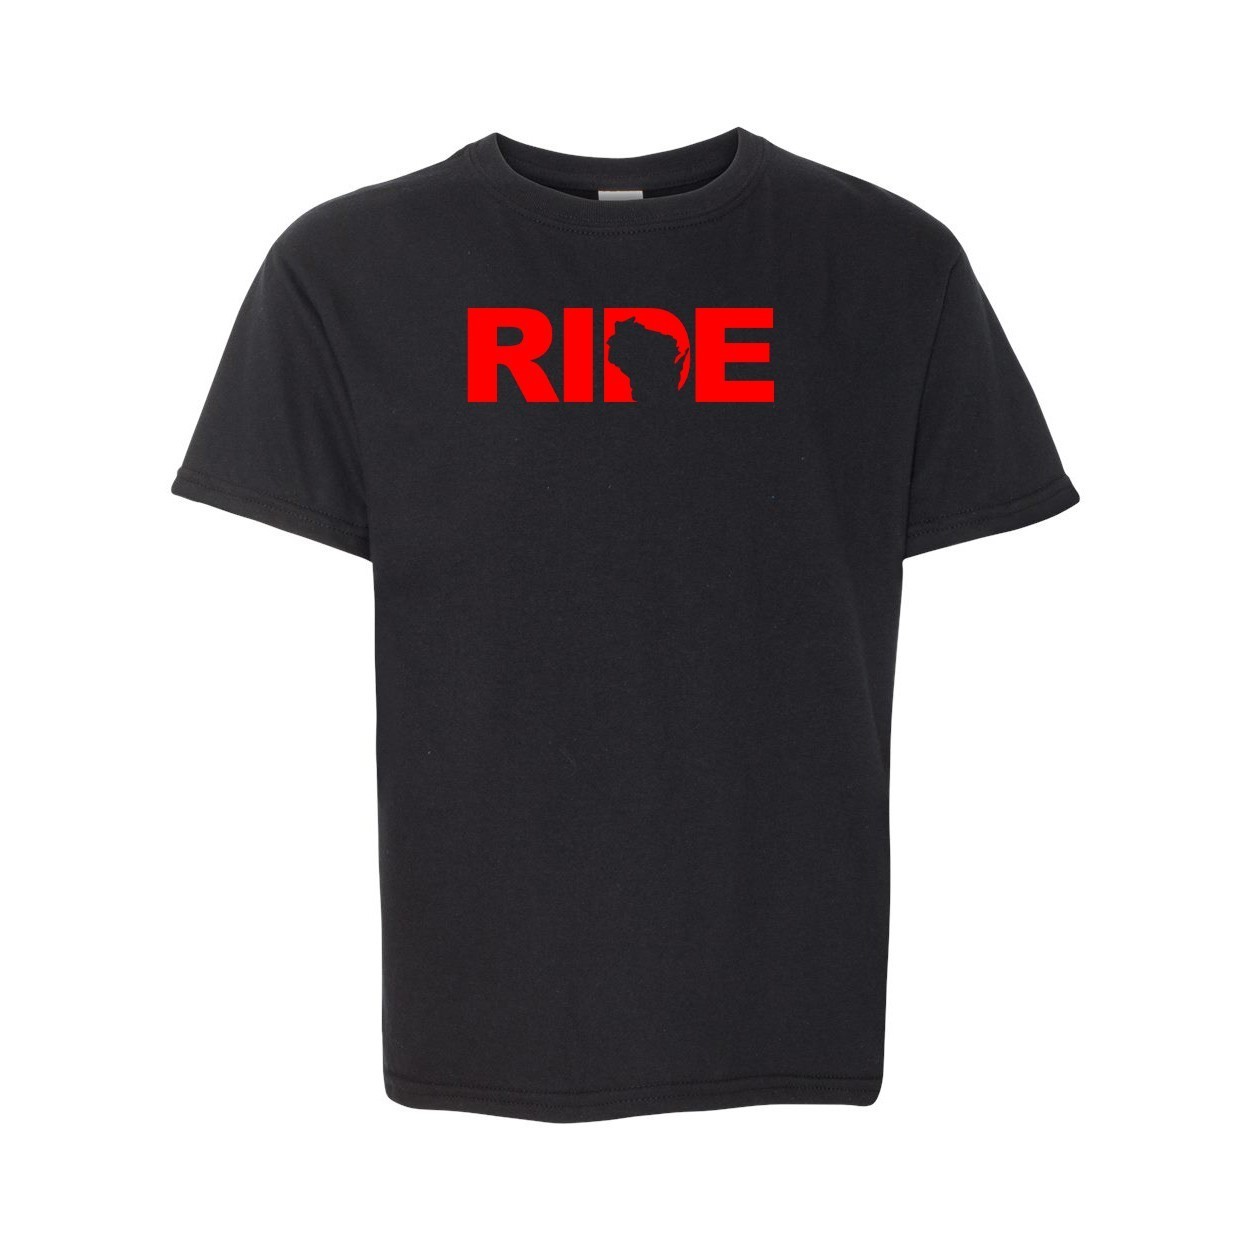 Ride Wisconsin Classic Youth Unisex T-Shirt Black (Red Logo)